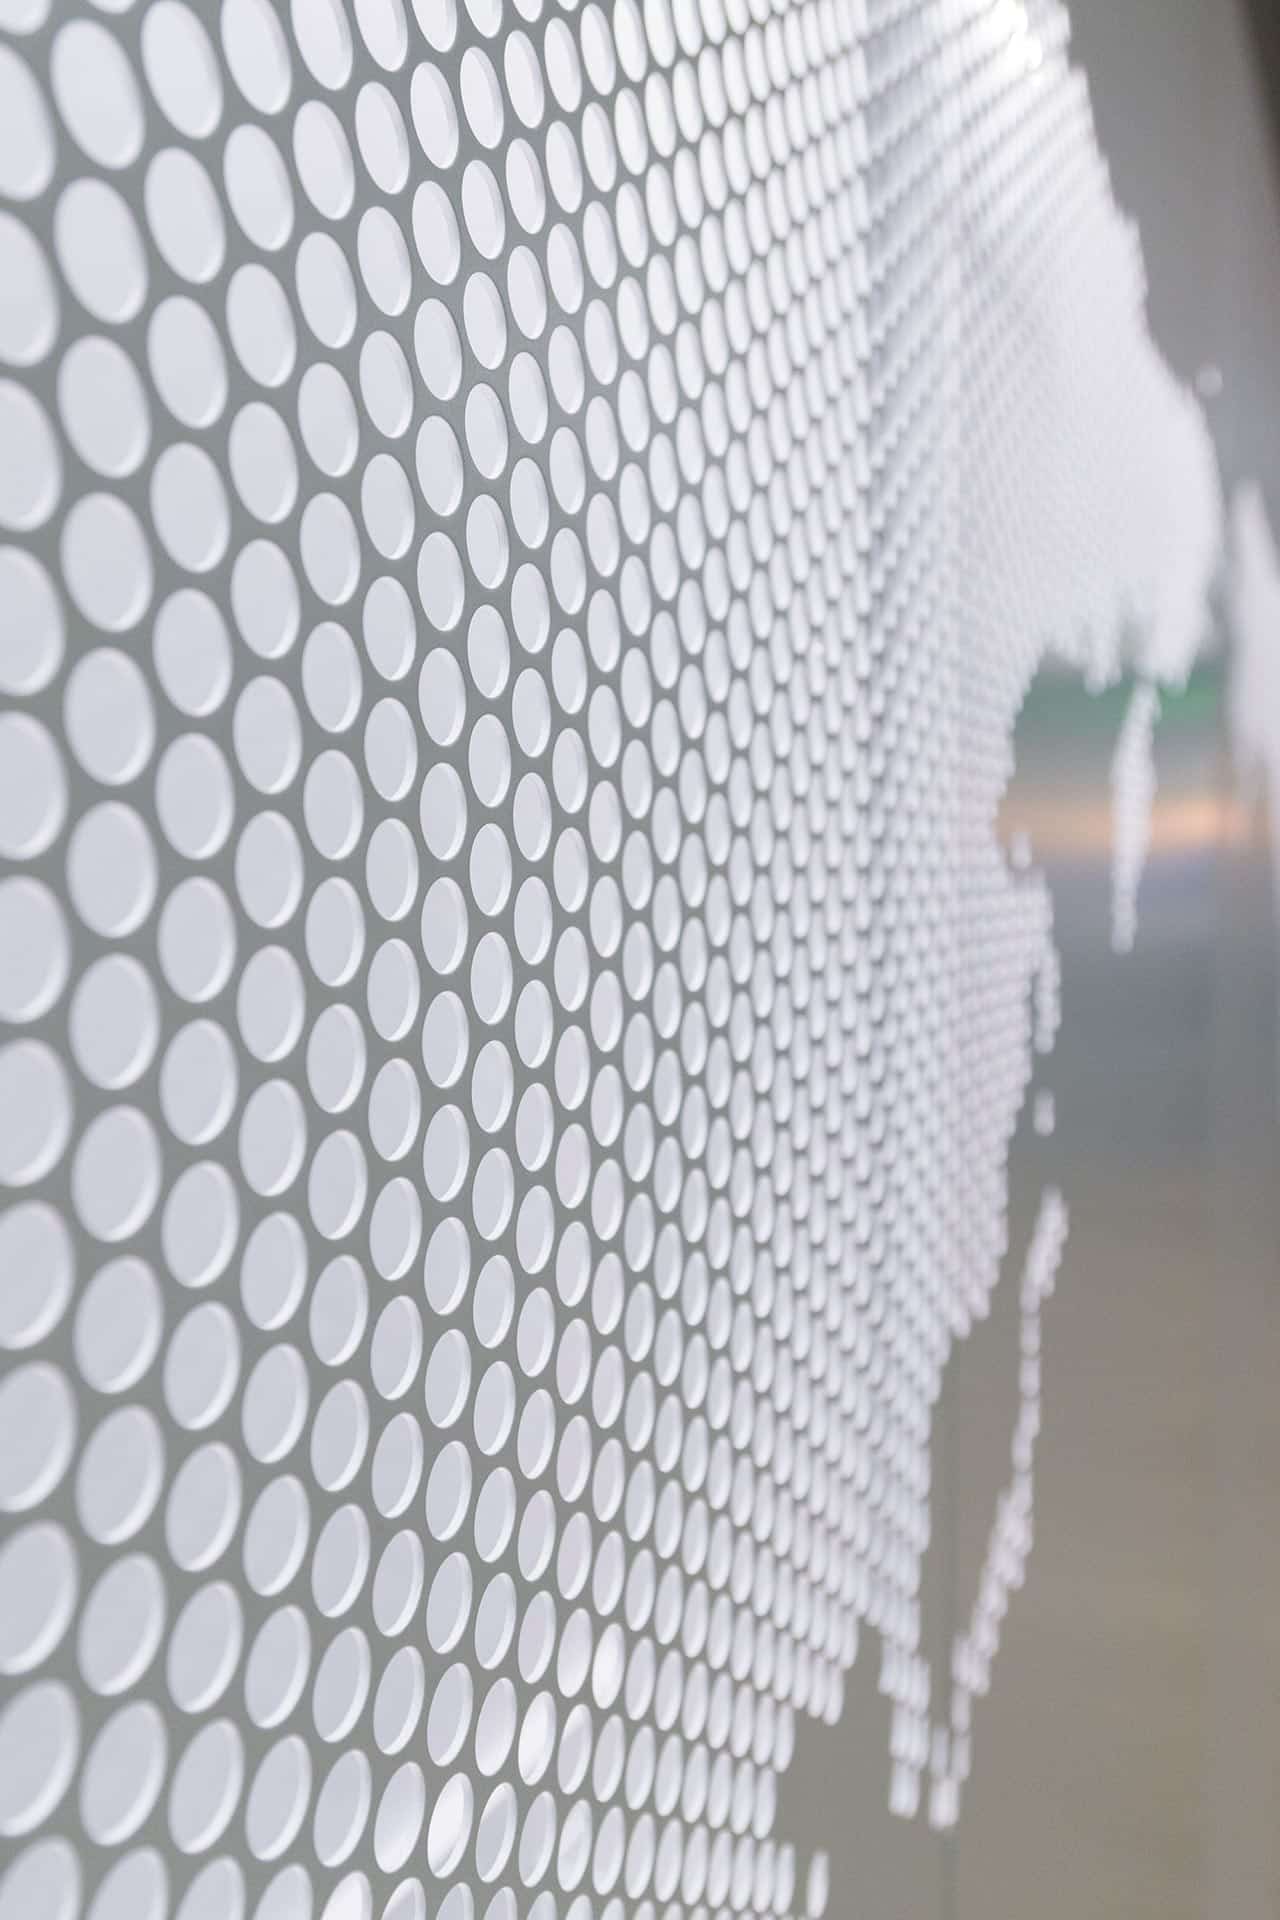 Detail of the perforated metal, painted grey on its exterior and white on its interior.